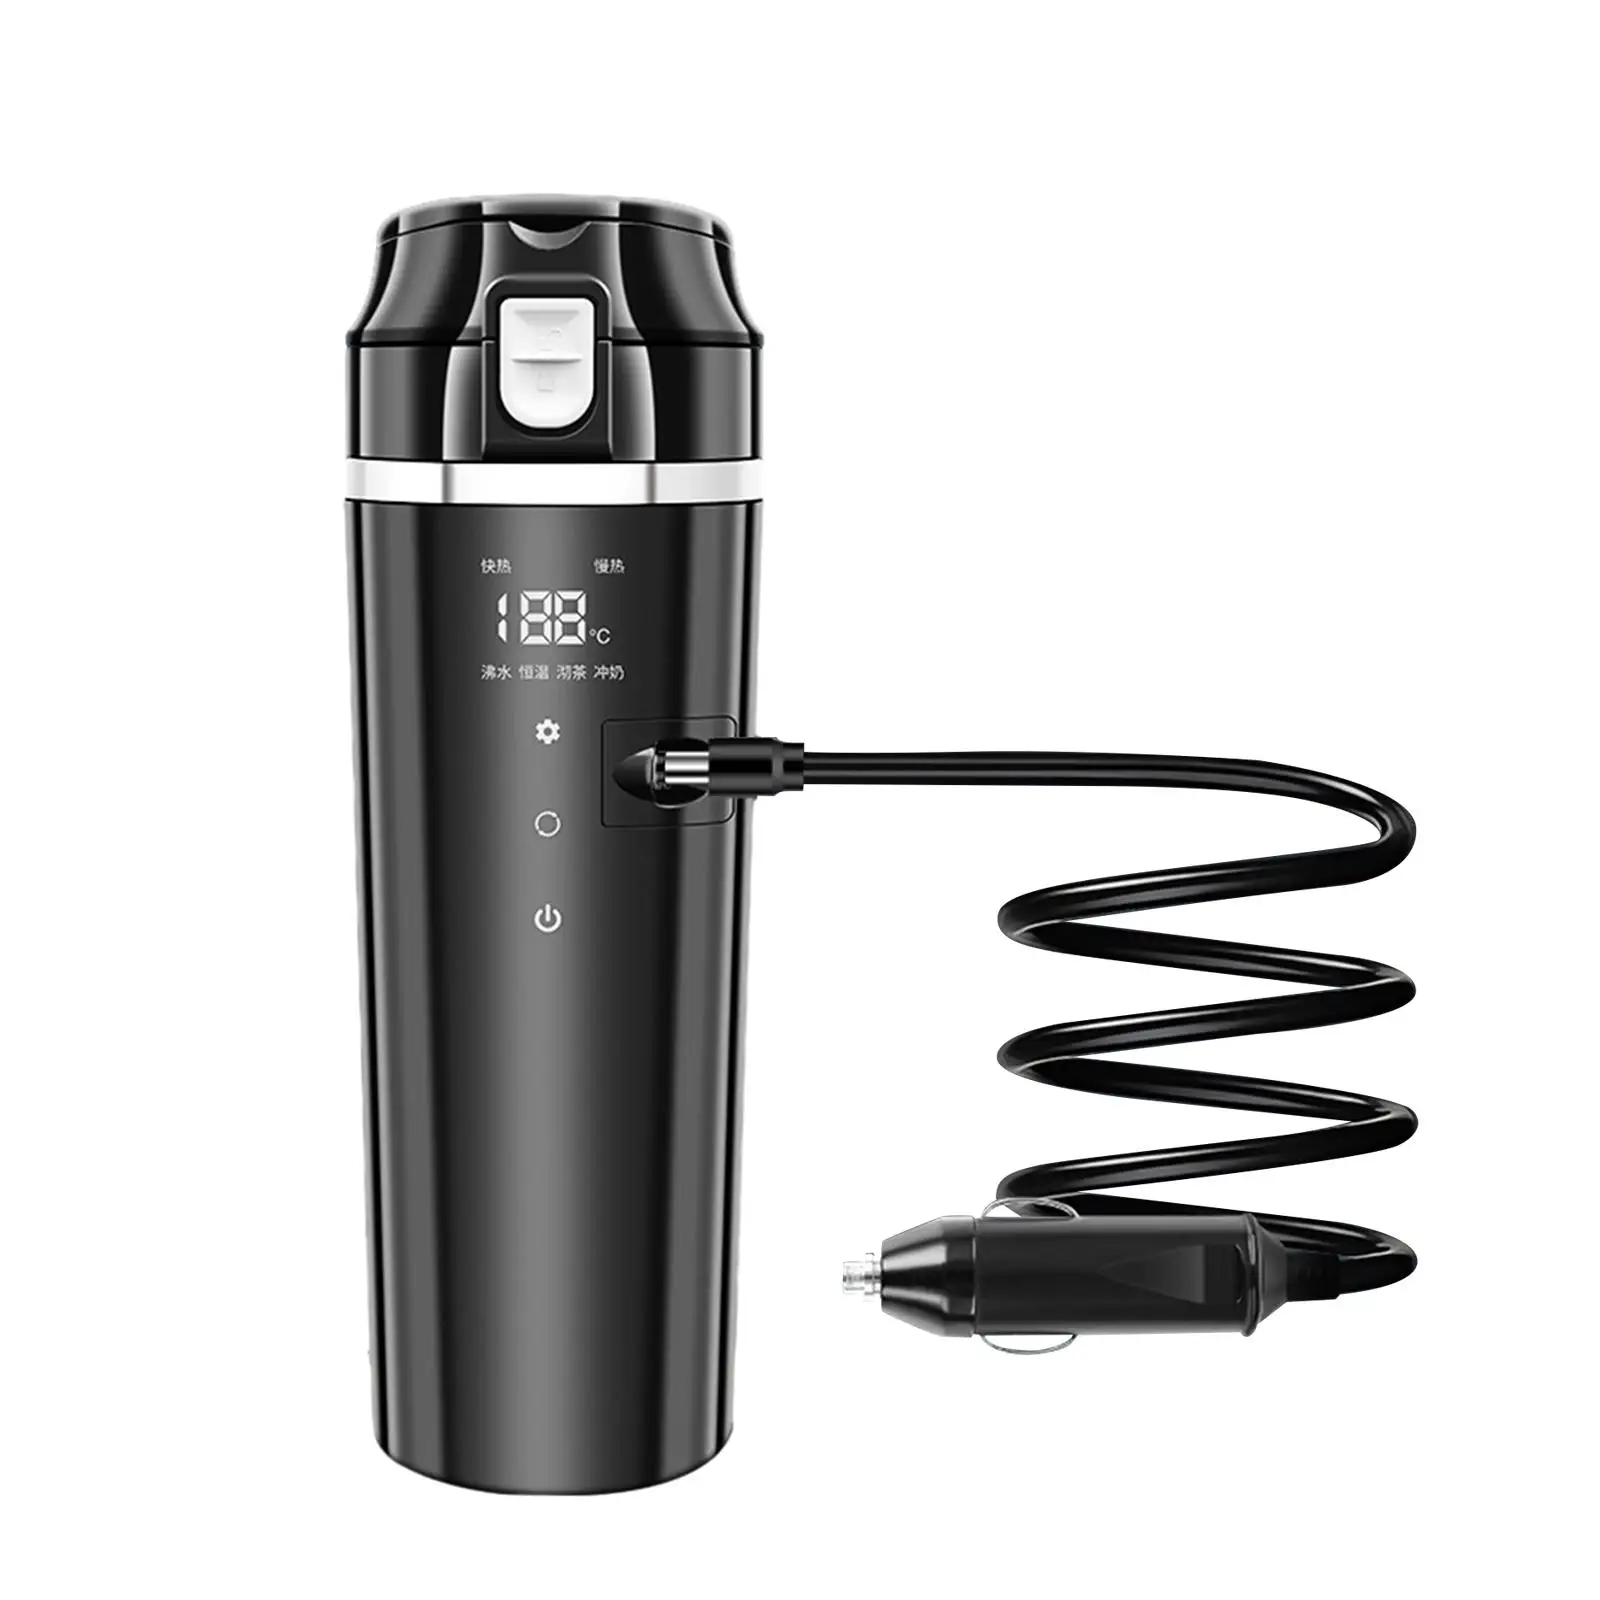 Car Electric Drinking Cup Travel Kettle 0.5L Stainless Steel DC Powered 50W-100W 9x2.8inch for Tea Coffee Multipurpose